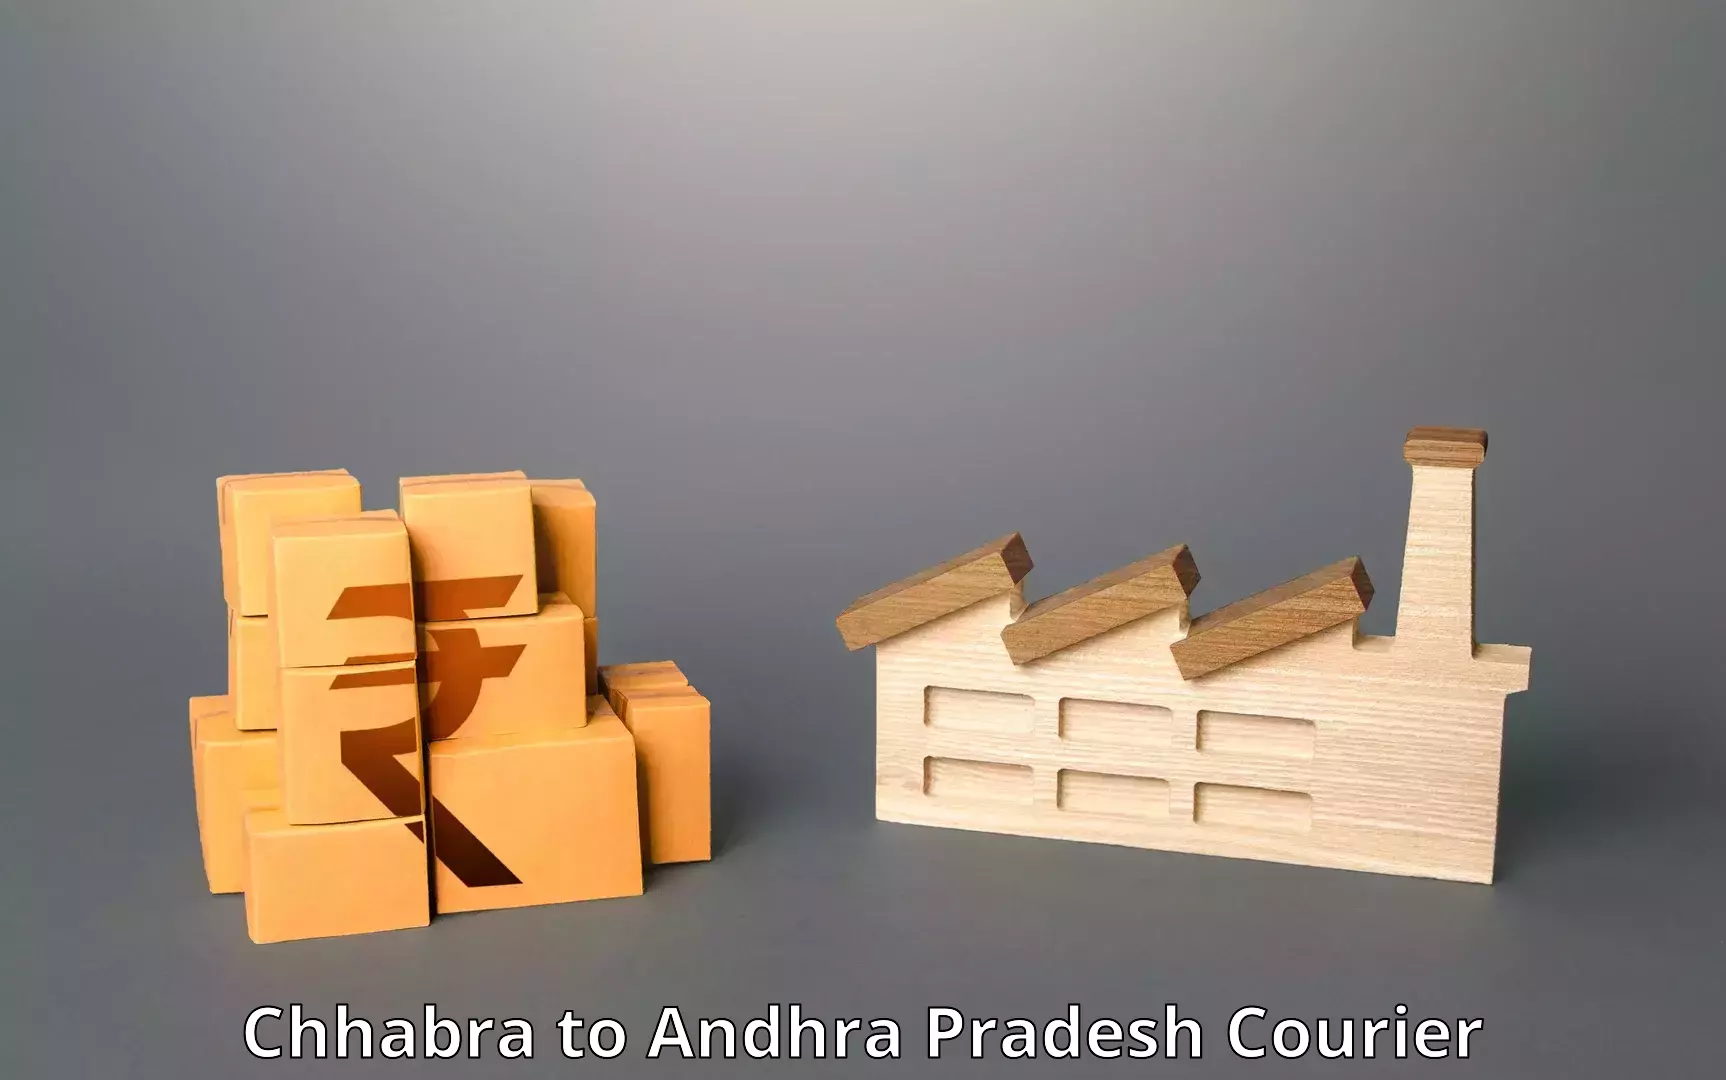 High-capacity courier solutions Chhabra to Visakhapatnam Port